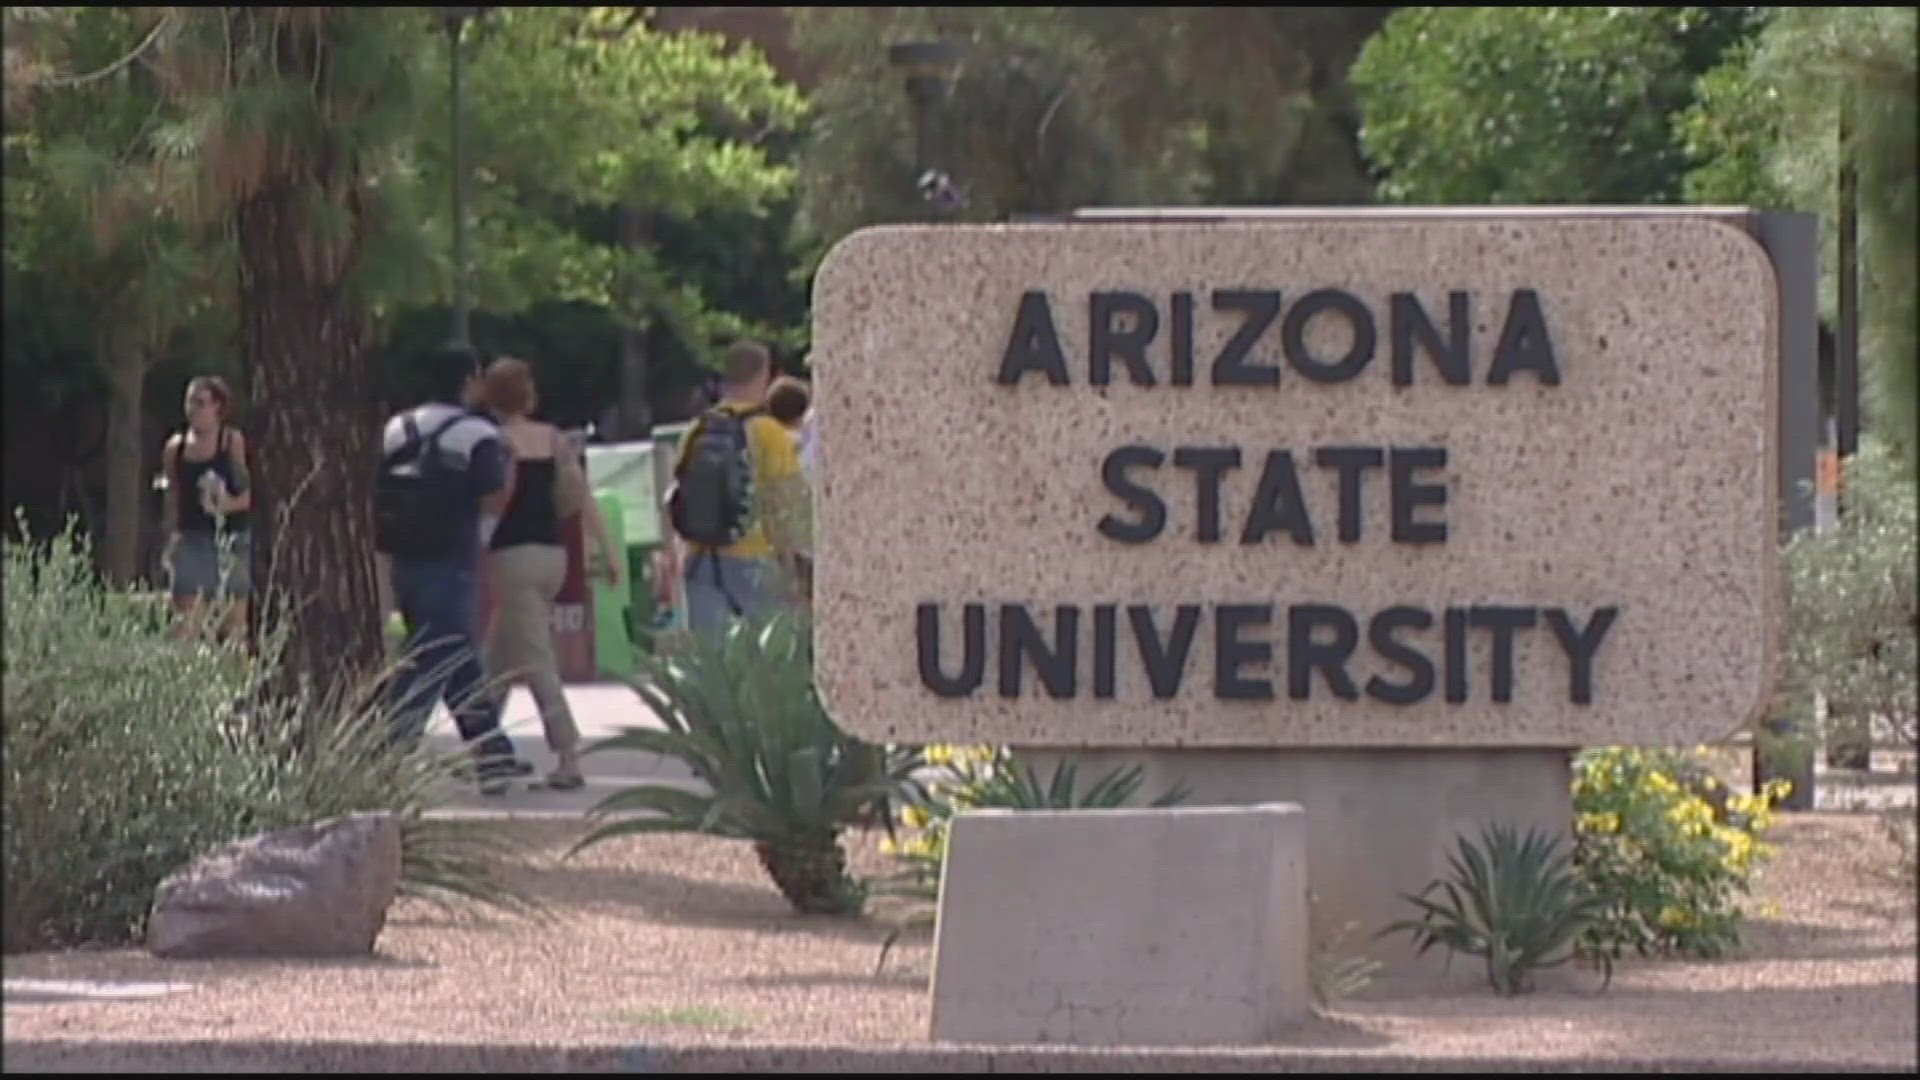 The state Board of Regents approved the price increases at the University of Arizona, Arizona State University, and Northern Arizona University.